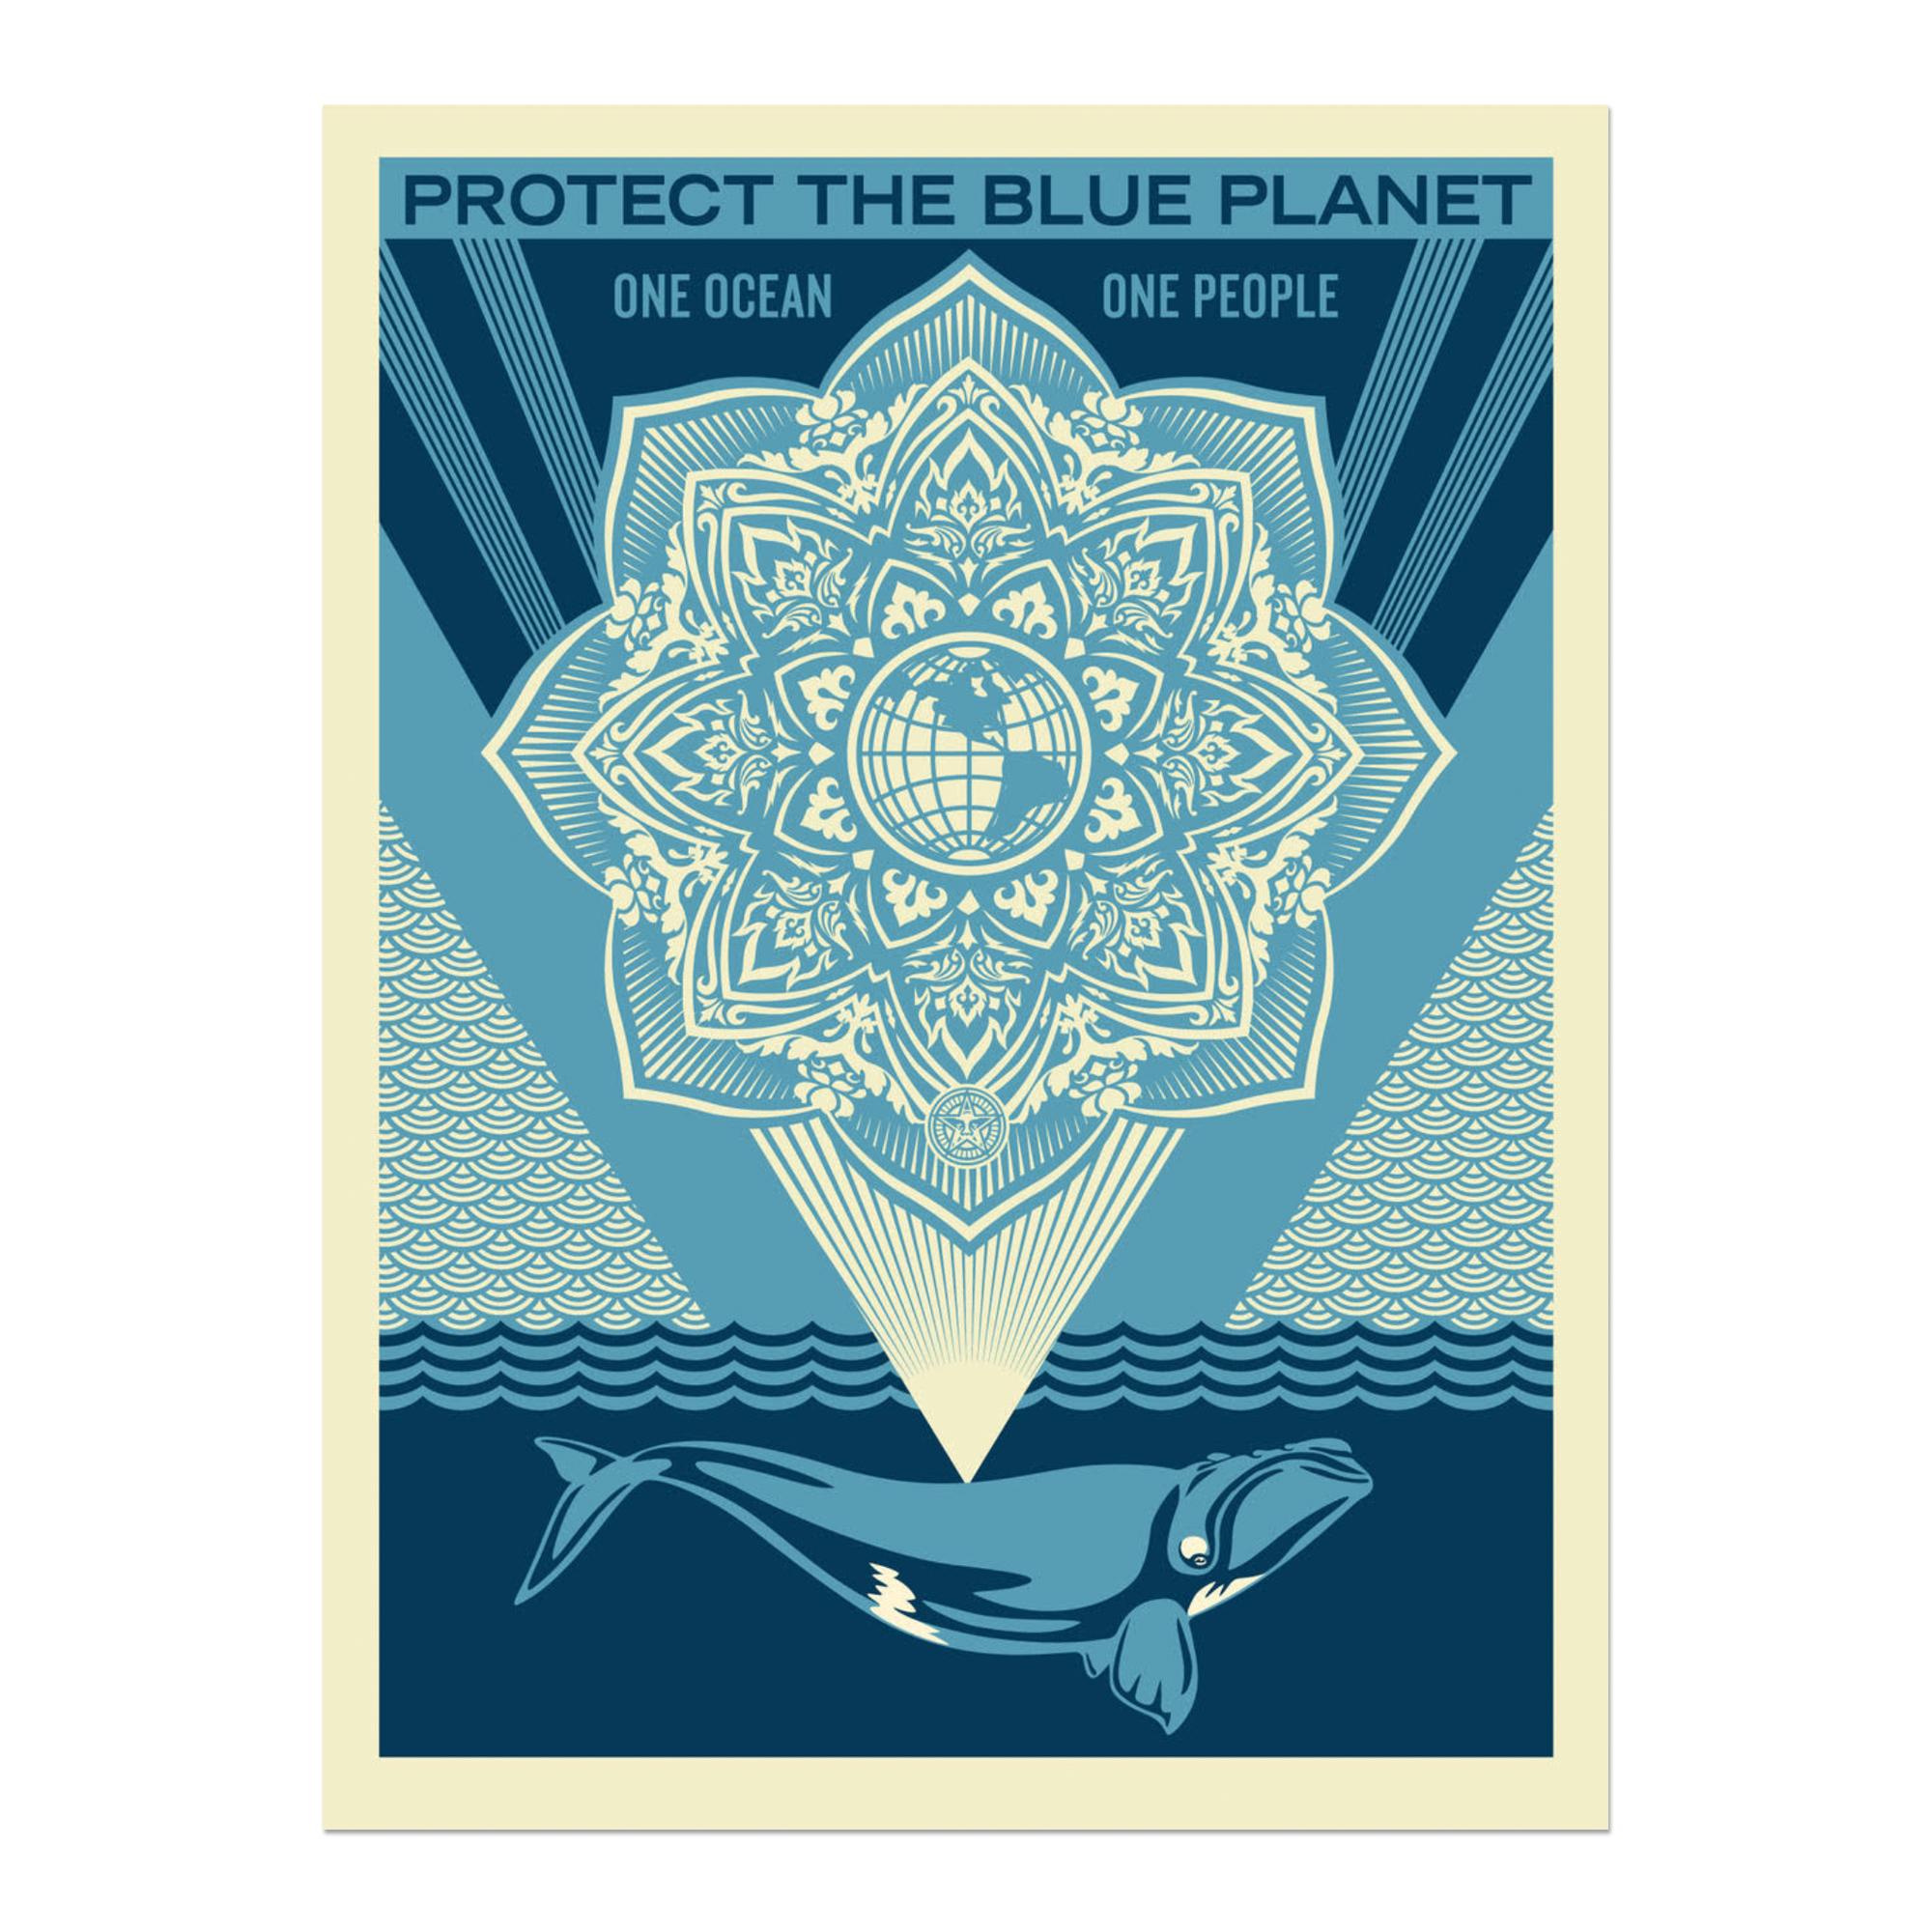 Shepard Fairey (American, b. 1970)
Protect The Blue Planet, 2022
Medium: Screenprint on Coventry Rag
Dimensions: 104 x 76 cm (41 x 30 in)
Edition of 75: Hand signed and numbered
Condition: Mint